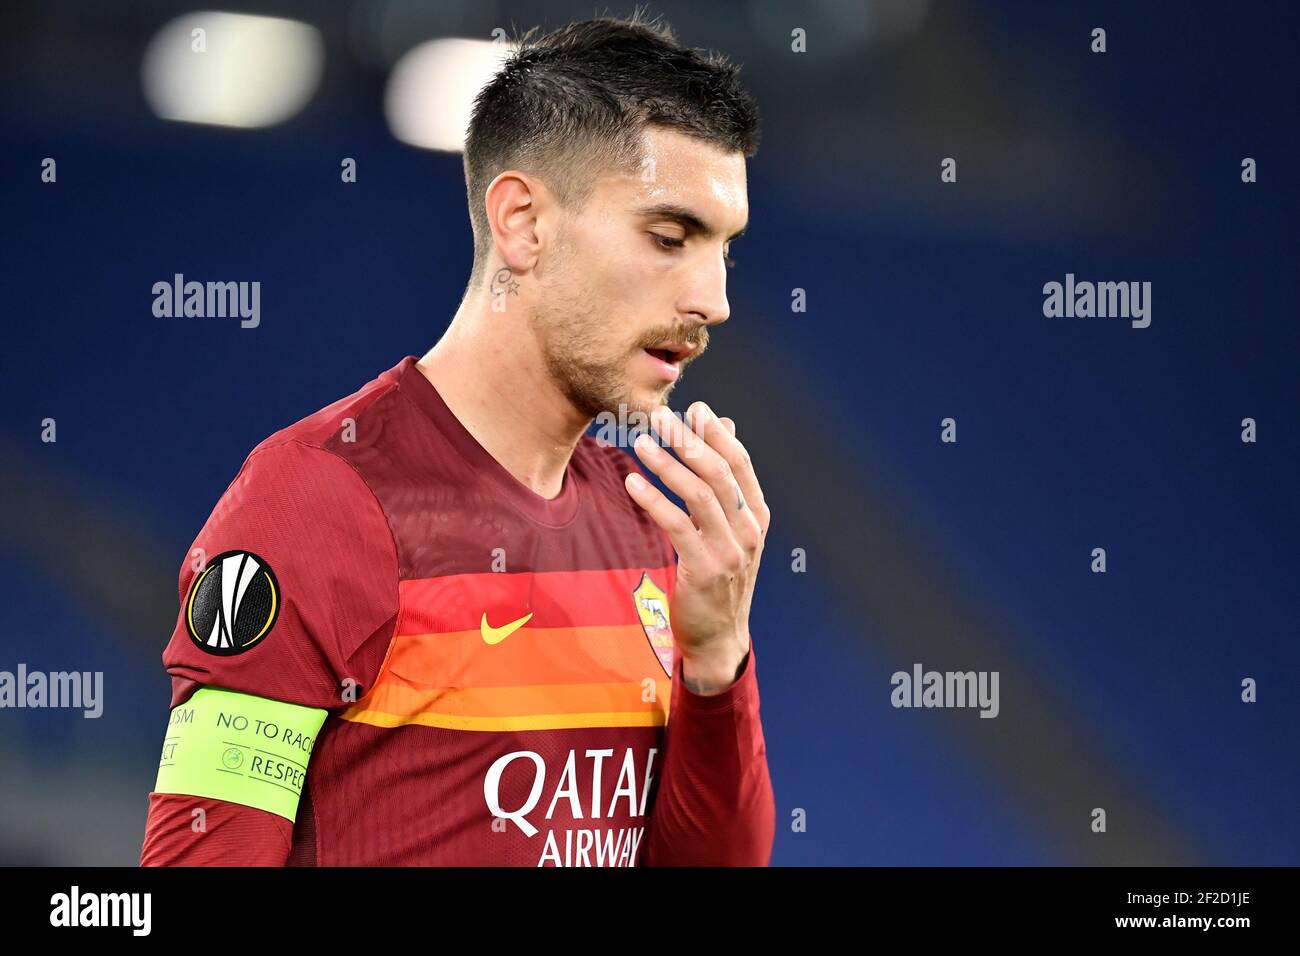 Rome, Italy. 11th Mar, 2021. Lorenzo Pellegrini of AS Roma reacts during the Europa League round of 16 football match between AS Roma and FC Shakhtar Donetsk at Stadio Olimpico in Rome (Italy), March, 11th, 2021. Photo Antonietta Baldassarre/Insidefoto Credit: insidefoto srl/Alamy Live News Stock Photo